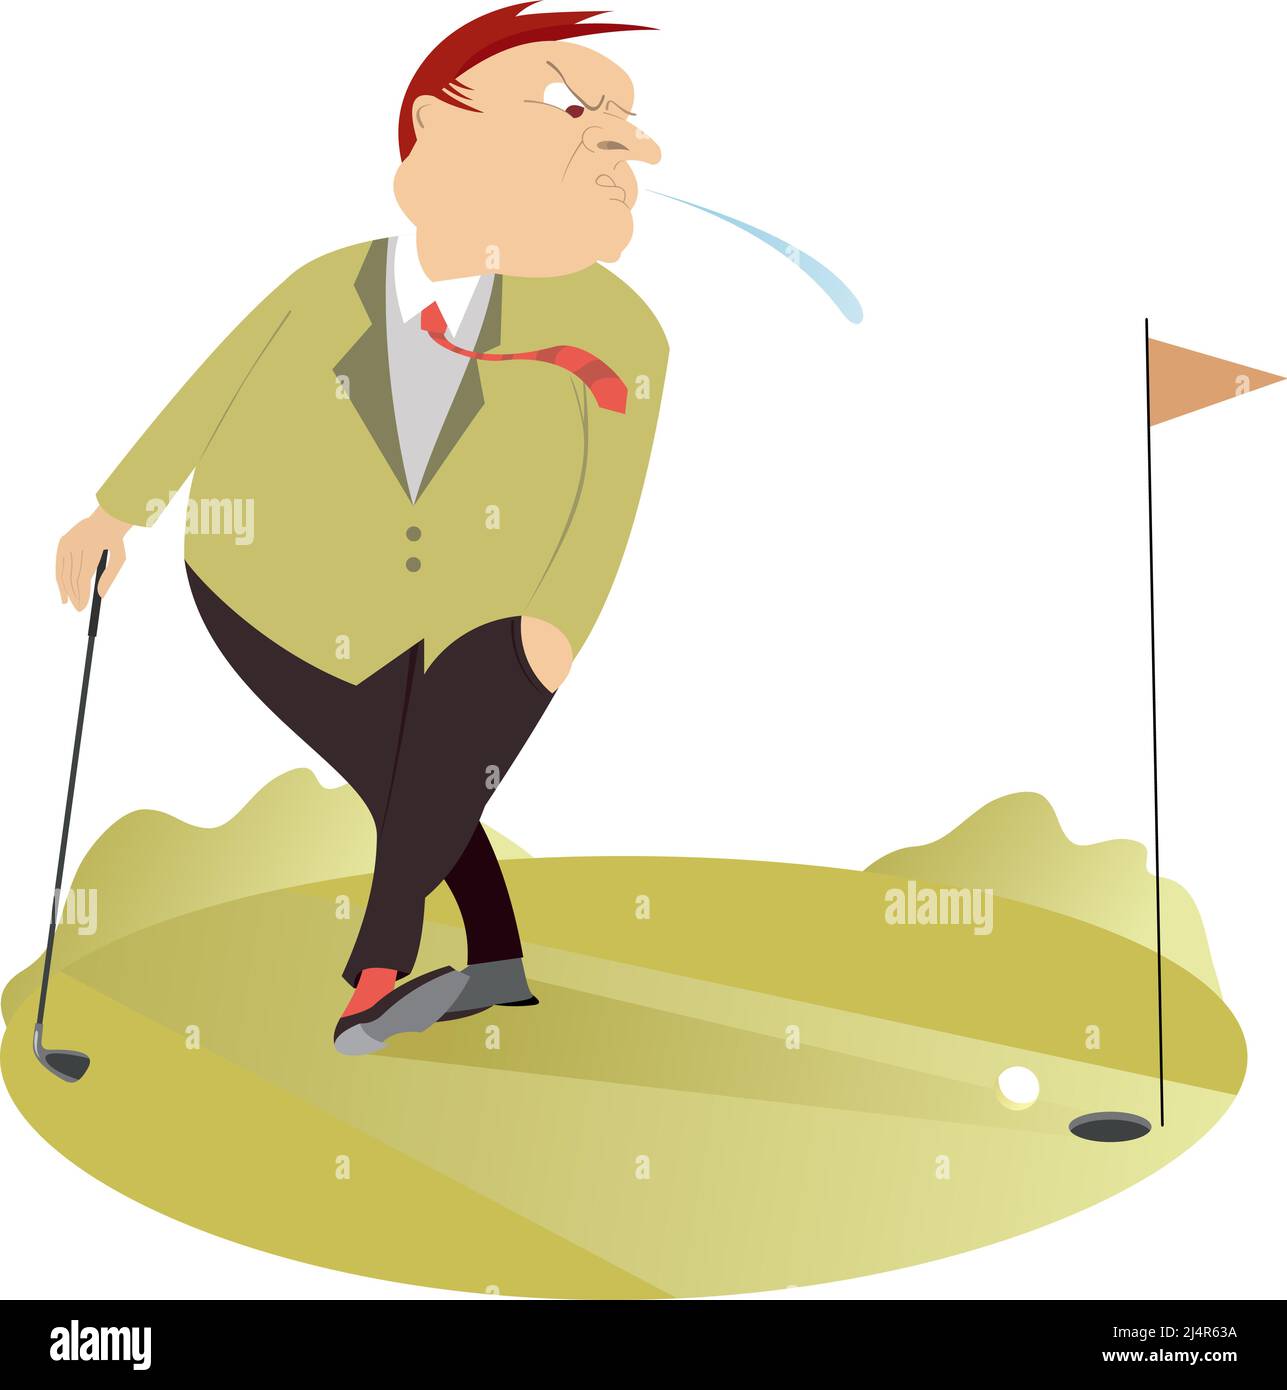 Upset golfer on the golf course illustration. Bad kick. Cartoon angry golfer man spitting to the golf flag Stock Vector